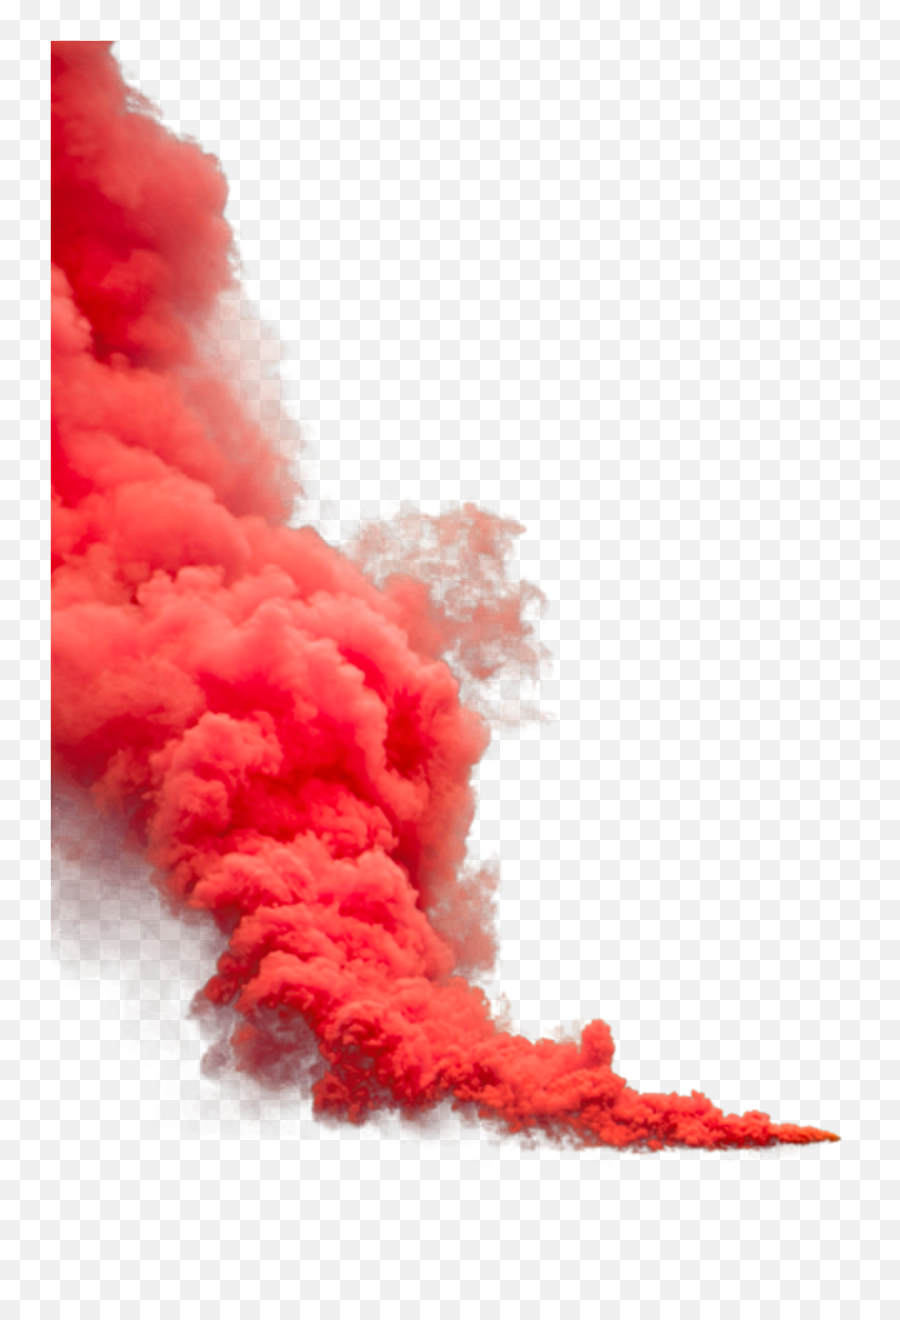 Picsart Smoke Bomb Png Transparent Png - Smoke Bomb Png Download Emoji,How To Make The Background Transparent In Photoshop